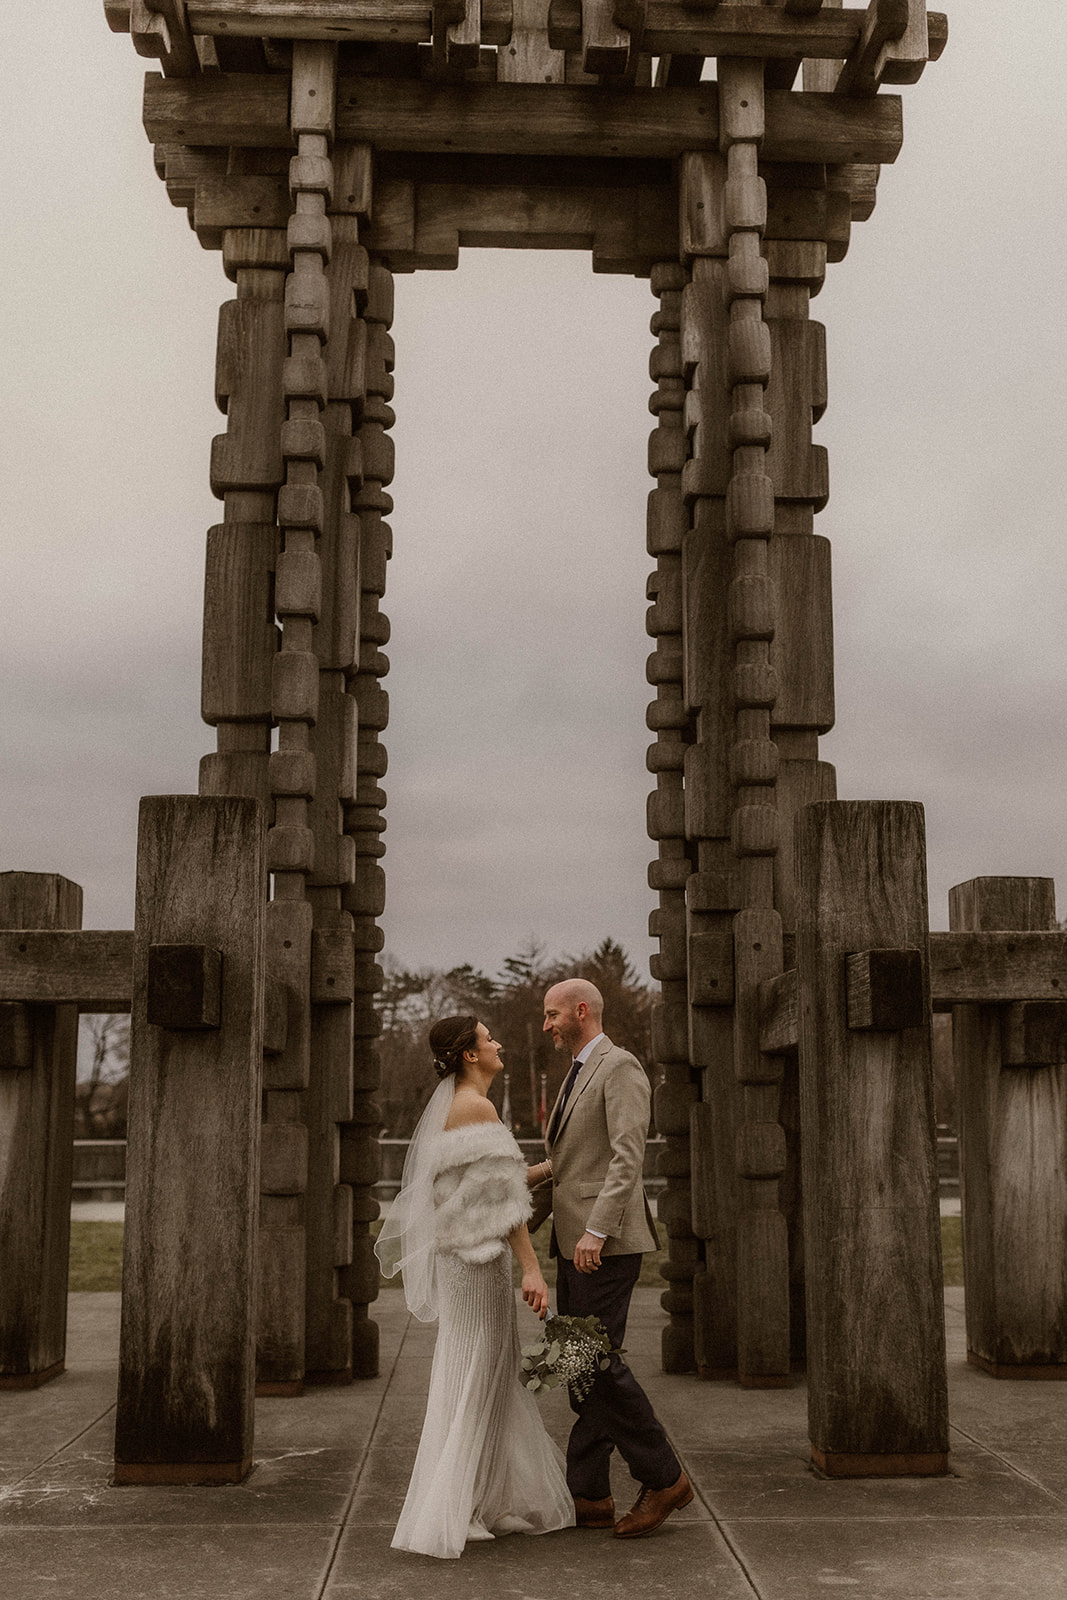 Intimate elopement ceremony in Albany, New York: exchanging vows amidst scenic beauty.